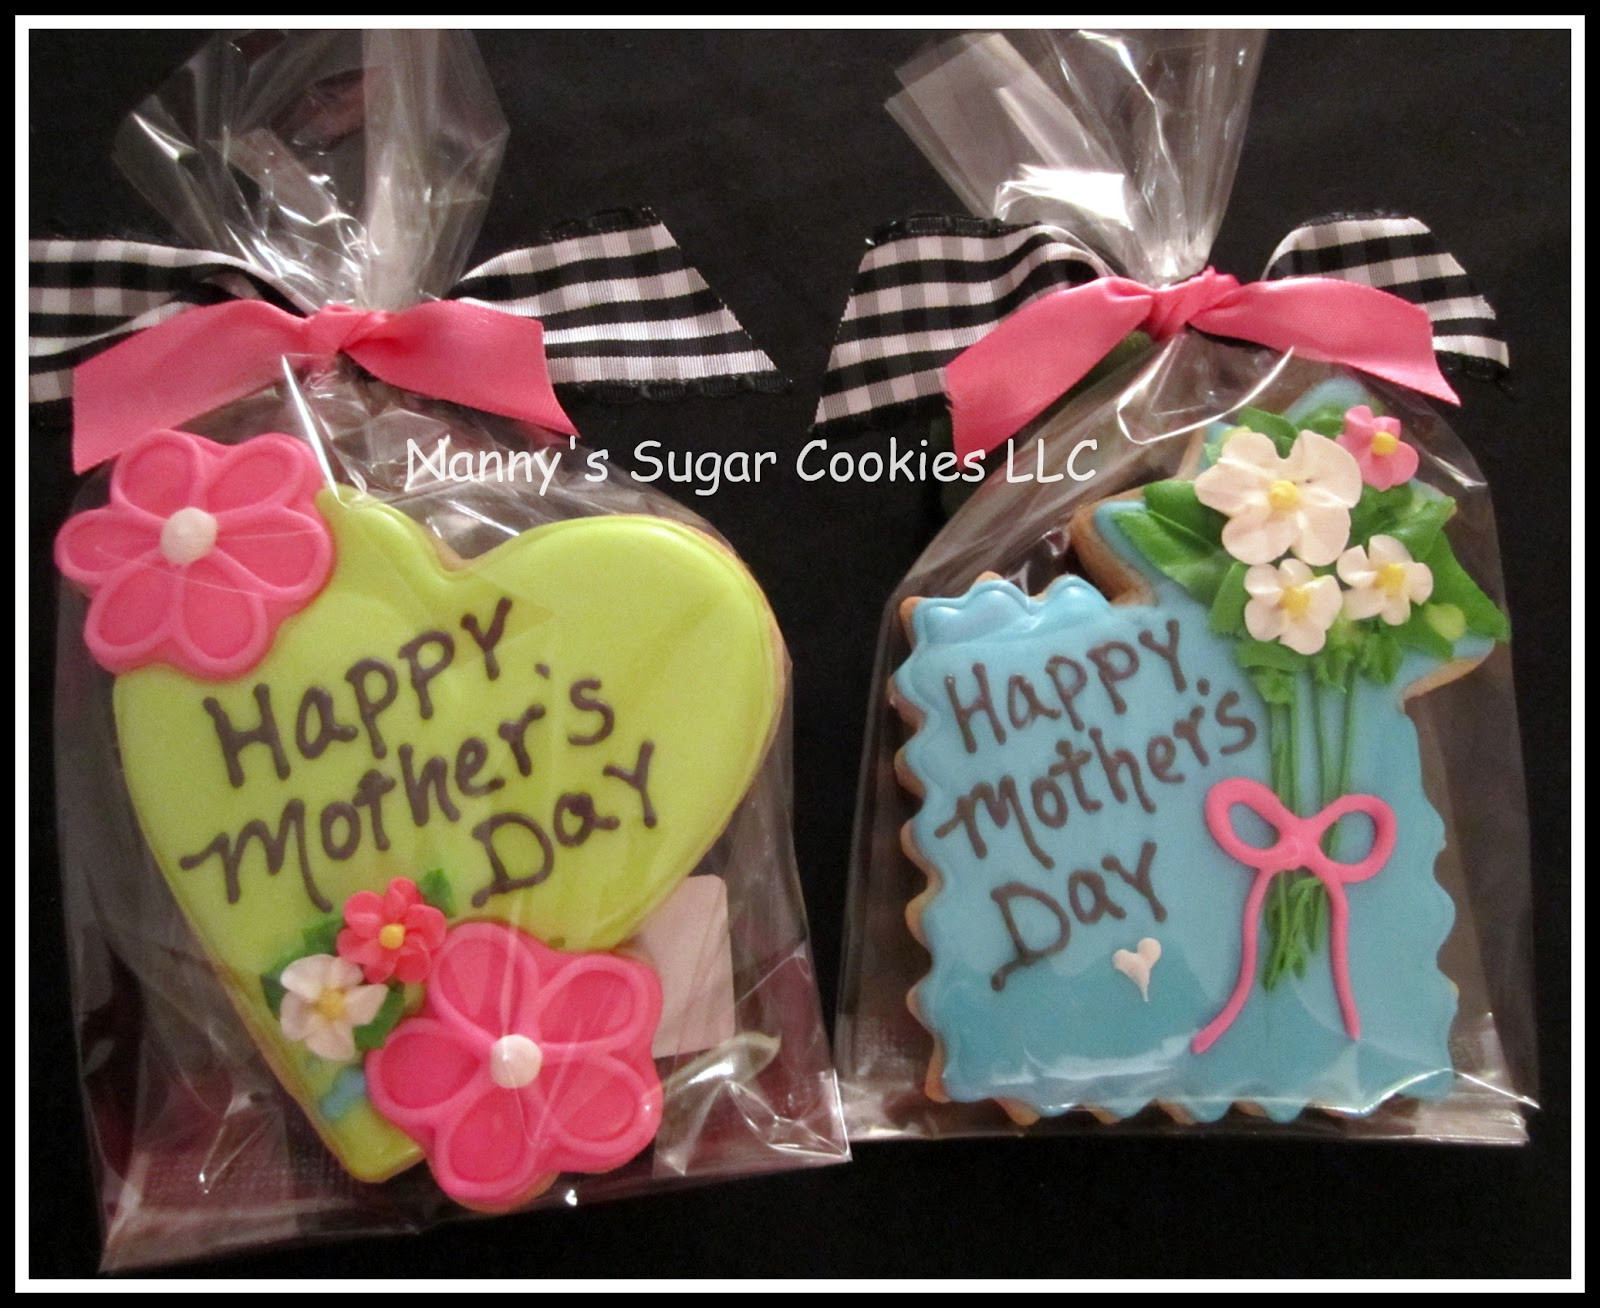 Mother'S Day Sugar Cookies
 Nanny s Sugar Cookies LLC Happy Mother s Day 2012